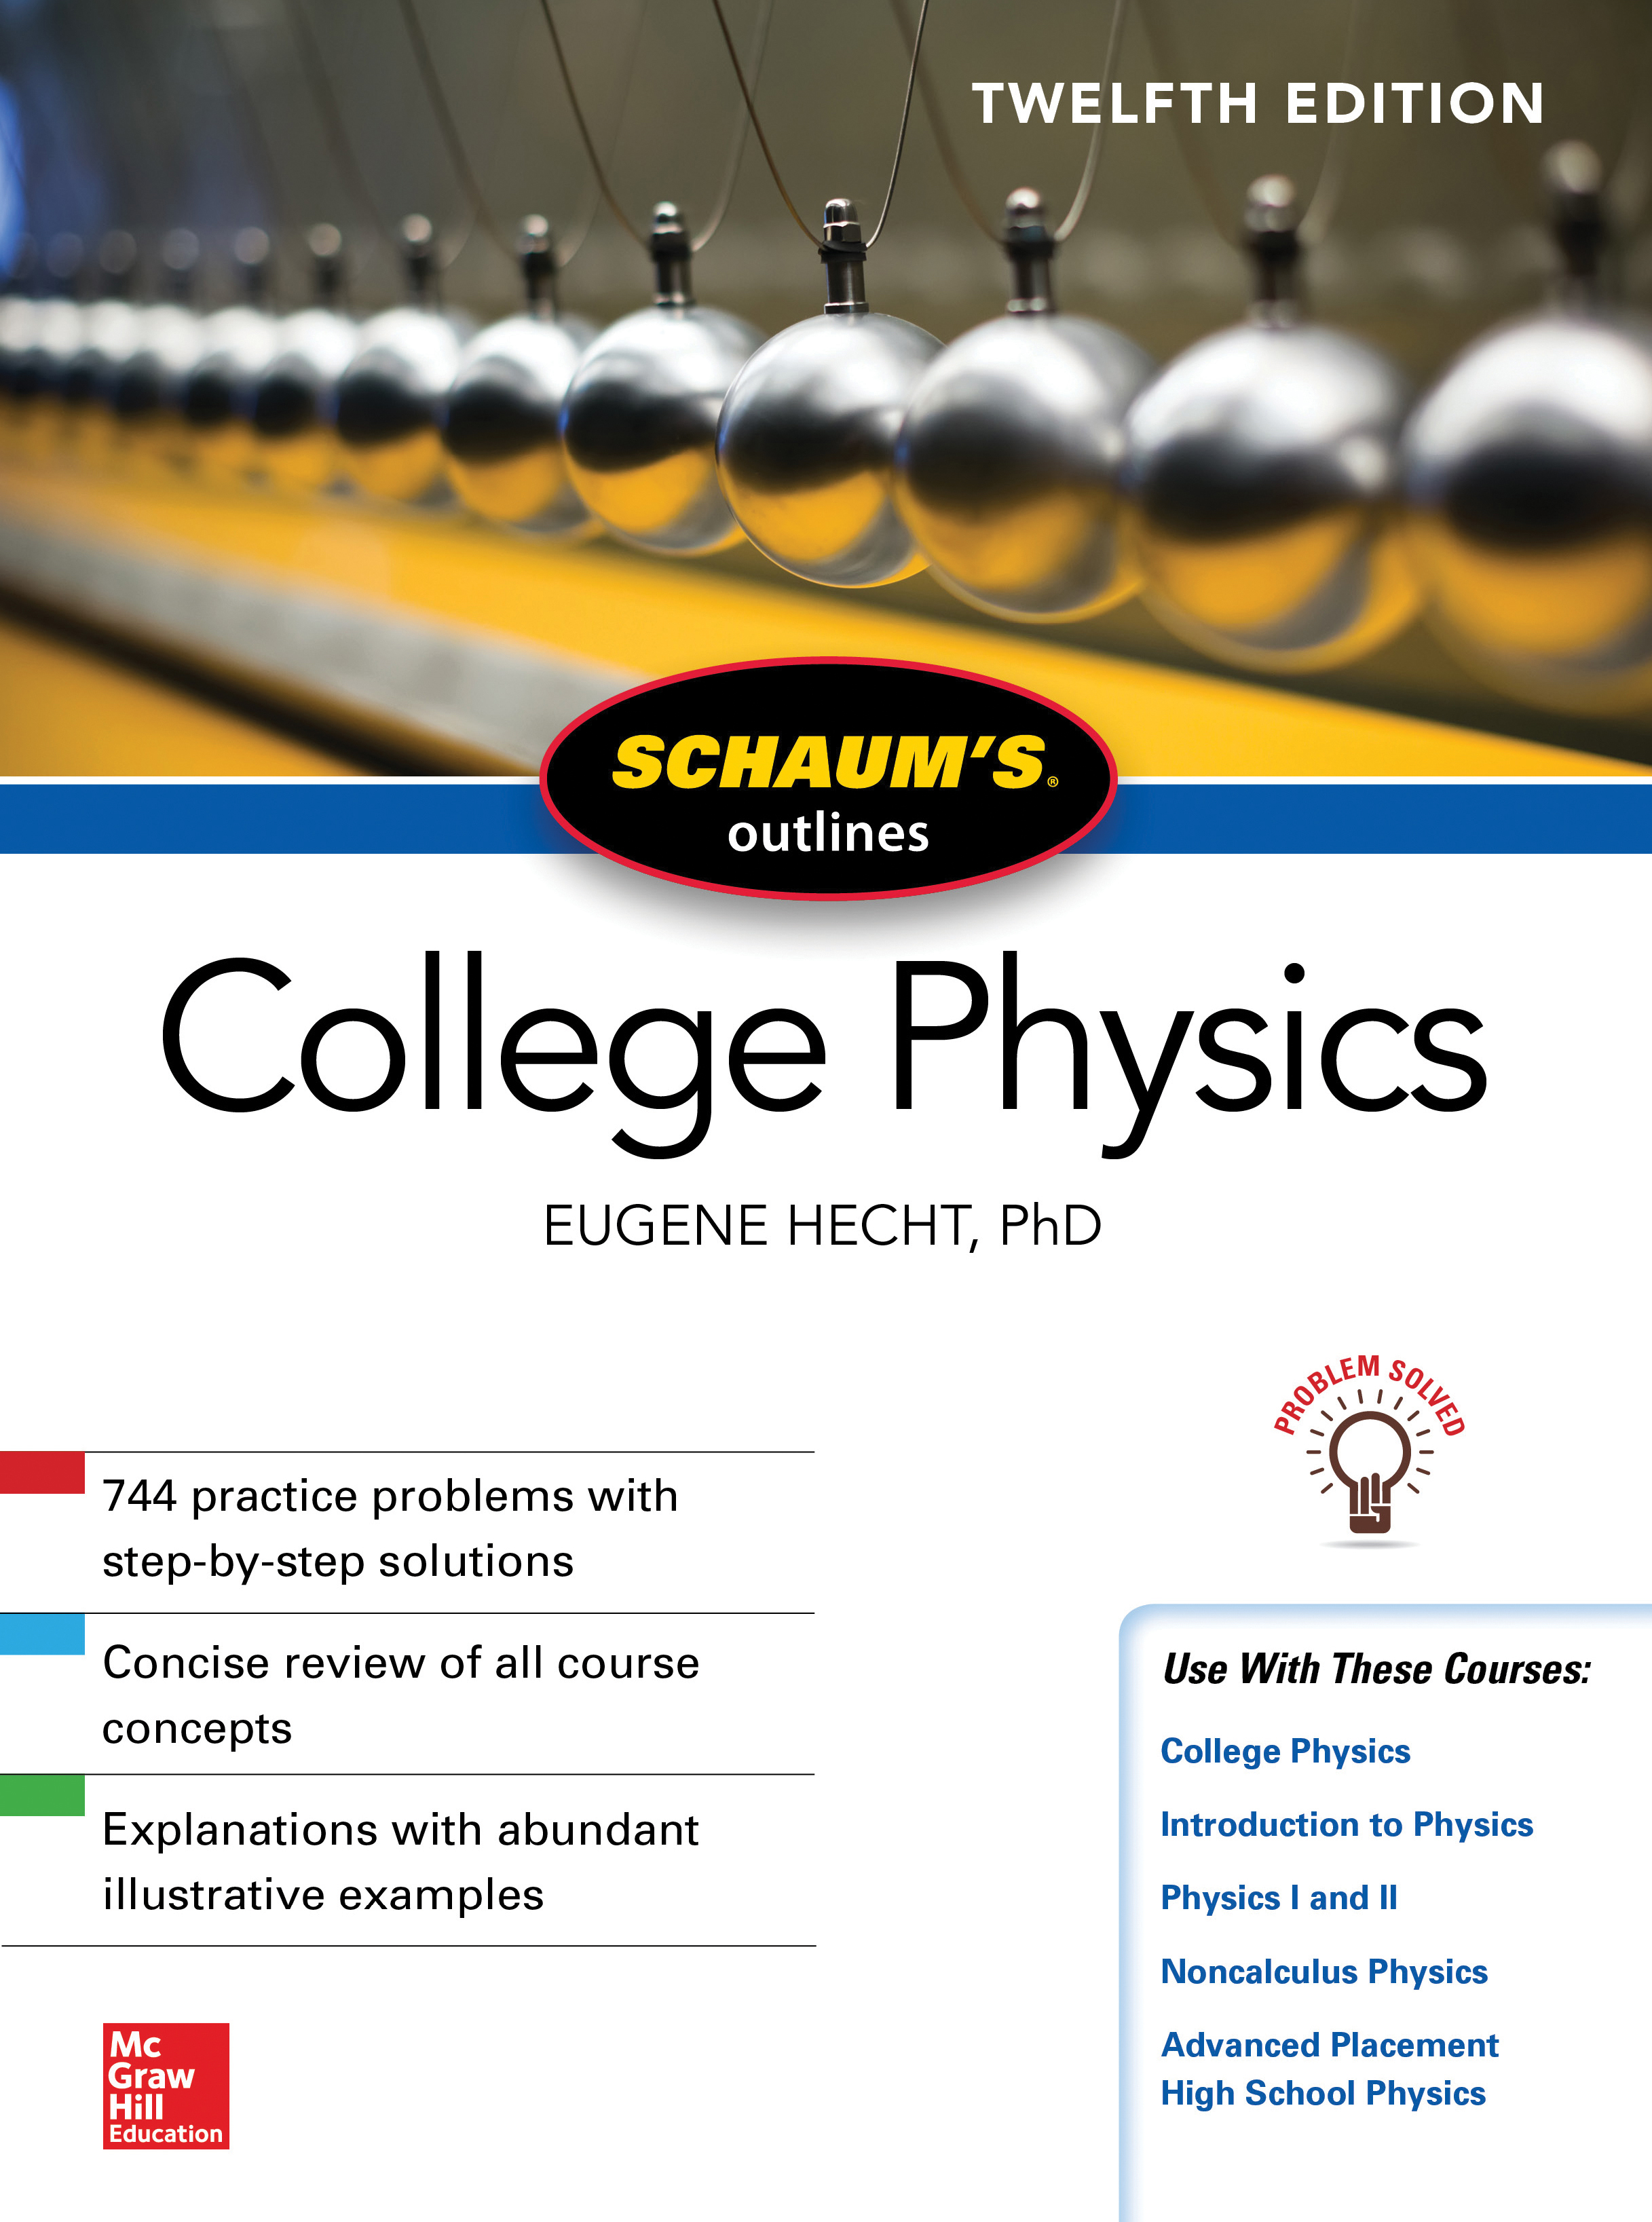 Schaum's Outline of College Physics, Twelfth Edition -  12th Edition